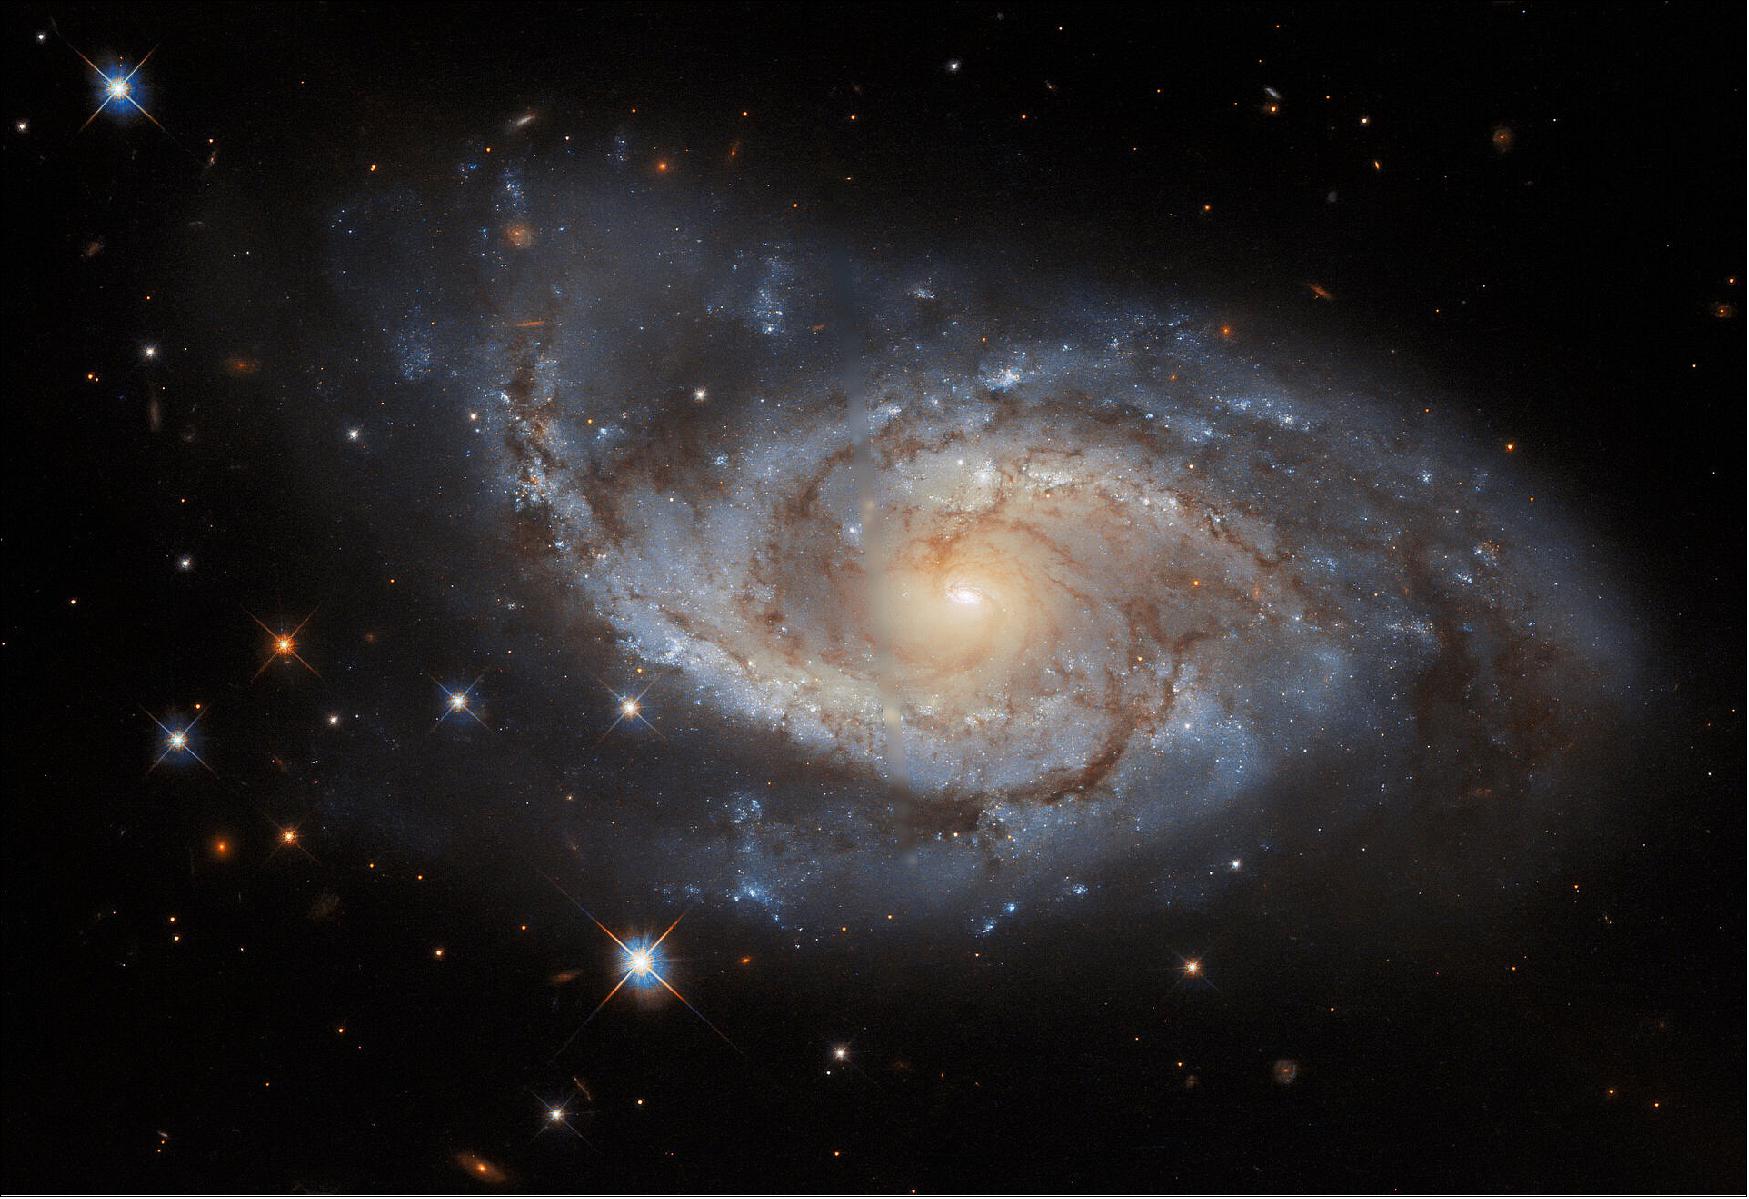 Figure 80: Despite its placid appearance, NGC 3318 has played host to a spectacularly violent astronomical phenomenon, a titanic supernova first detected by an amateur astronomer in 2000. Thanks to NGC 3318’s distance from Earth, the original supernova must have taken place in or around 1885. Coincidentally, this was the year in which the only supernova ever to be detected in our neighboring galaxy Andromeda was witnessed by 19th-century astronomers (image credit: ESA/Hubble & NASA, ESO, R. J. Foley; CC BY 4.0 Acknowledgement: R. Colombari)